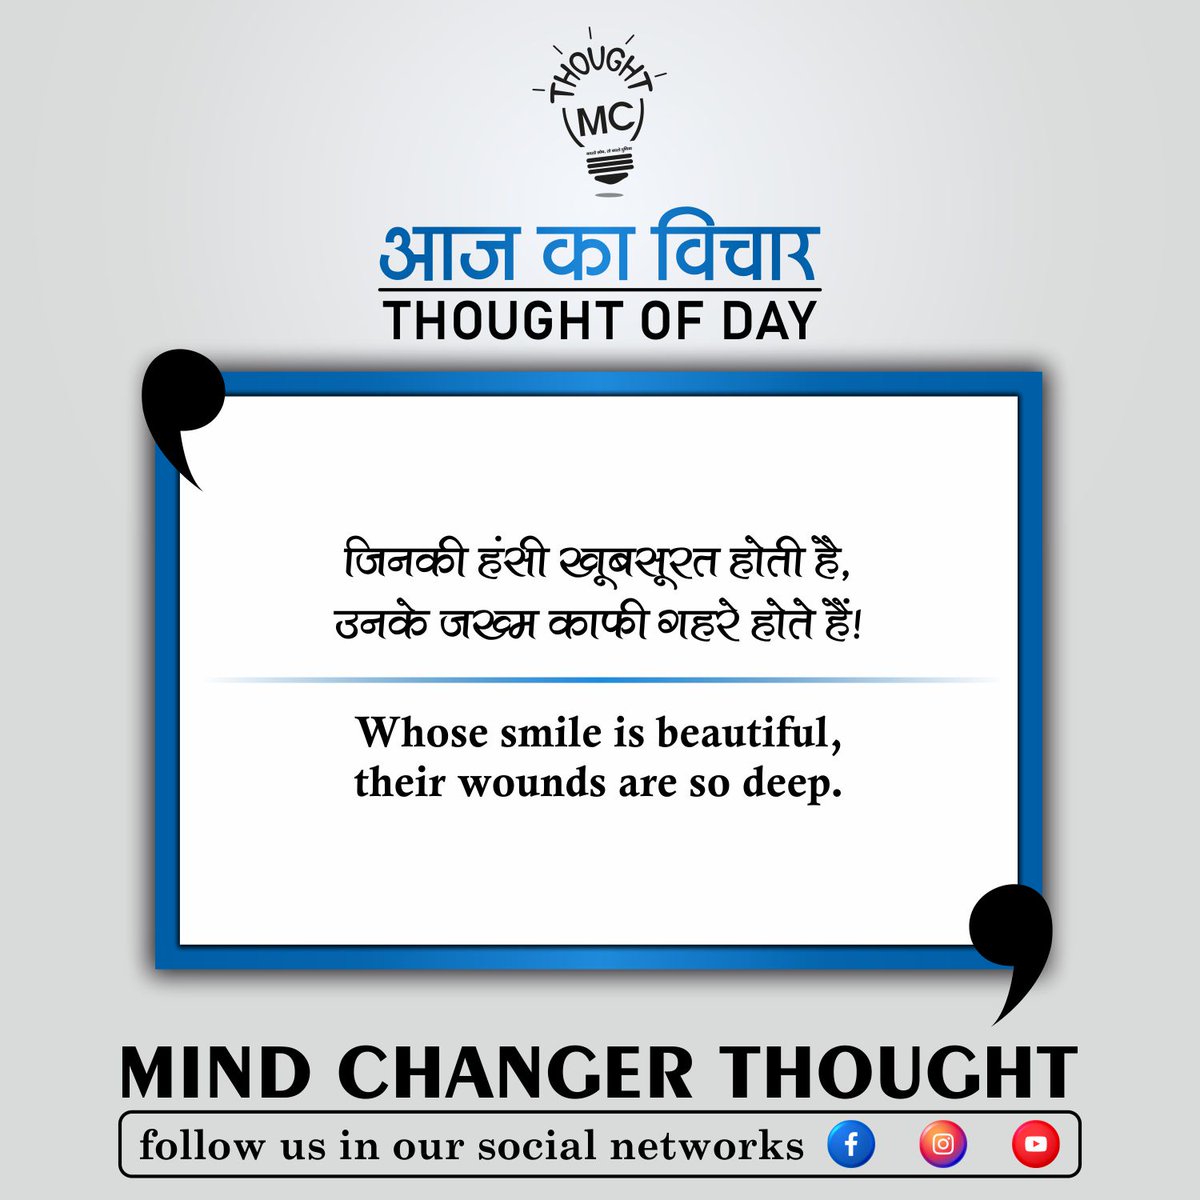 In this #motivation about ‘Beautiful Smile’ ​#smile #beautiful #wound #deep #diligence #success #thought #mindchangerthought